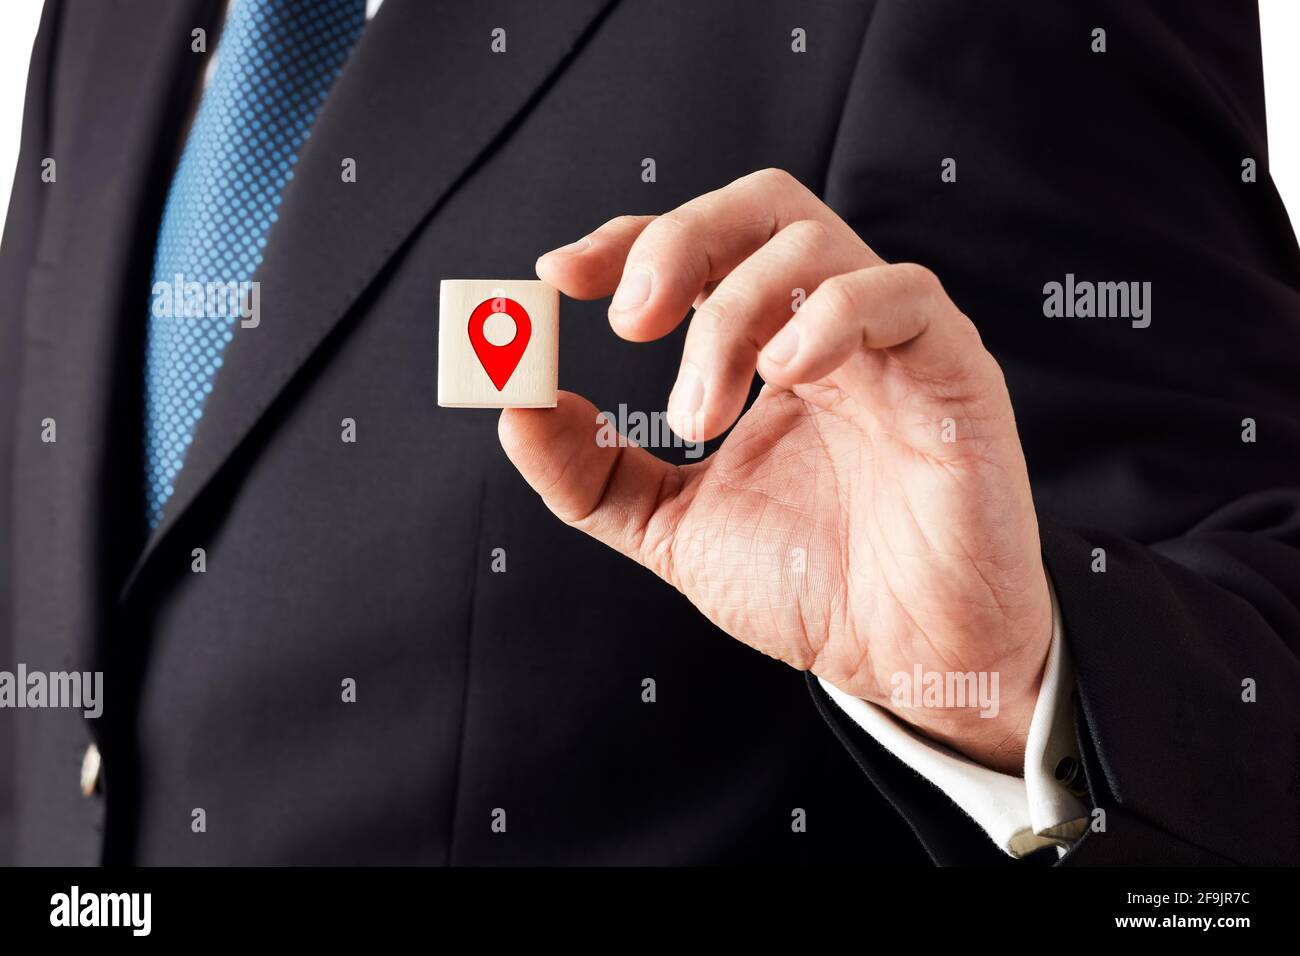 Businessman shows a wooden cube with a map pin location icon. Stock Photo